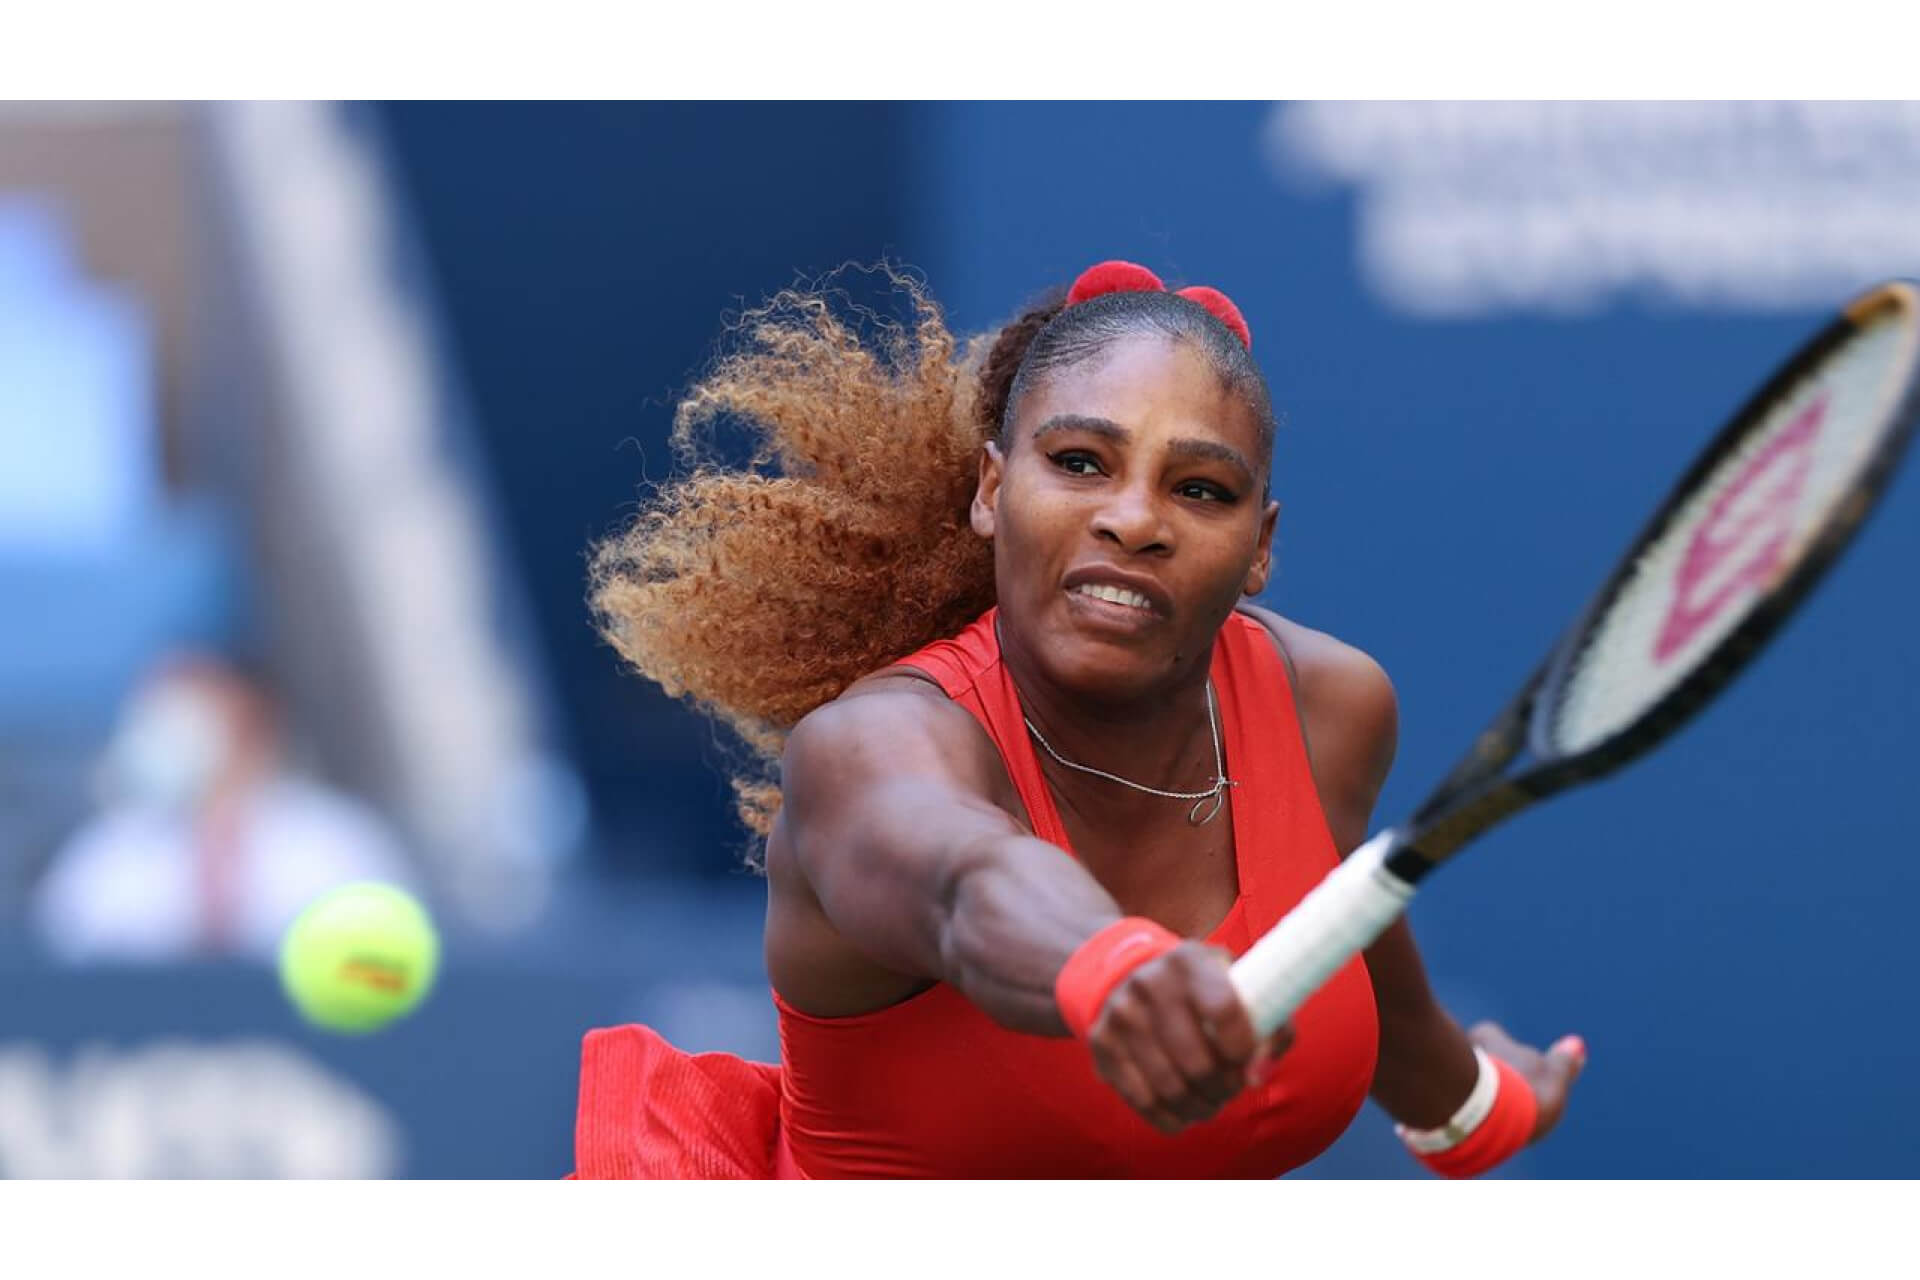 Us Open 2020 Serena Williams Victorious Against Sloane Stephens Sidomex Entertainment